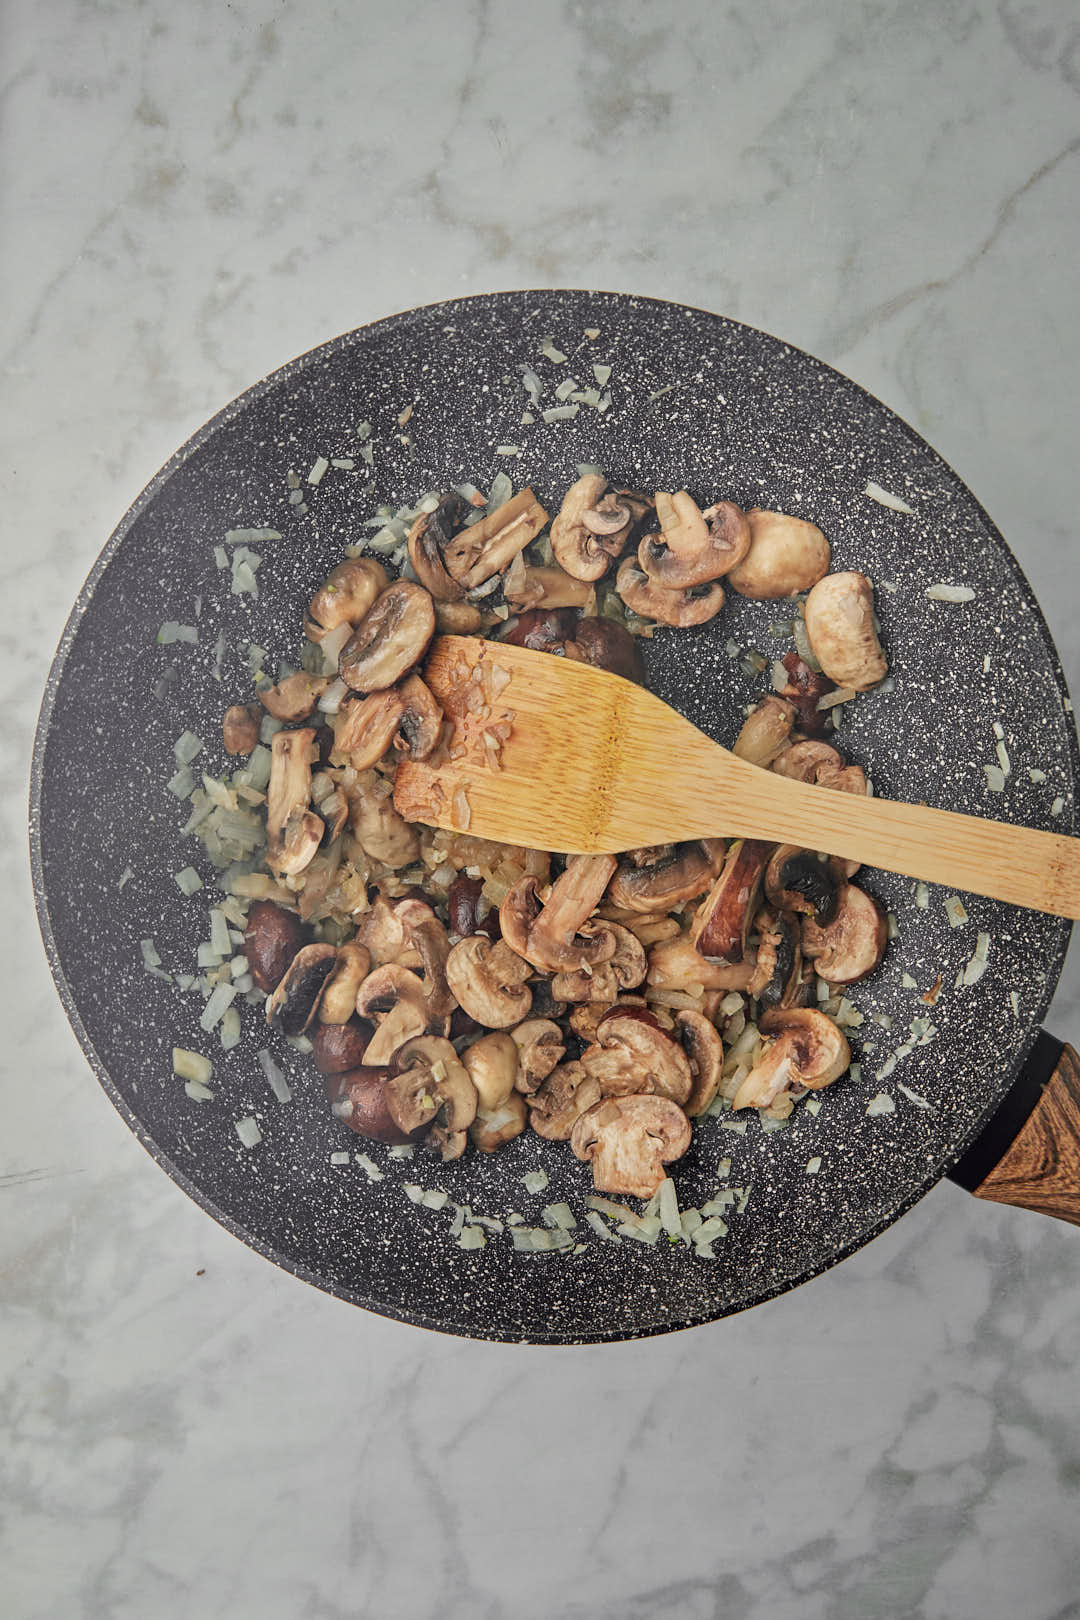 sauteed mushrooms, onoins and garlic in a skillet.